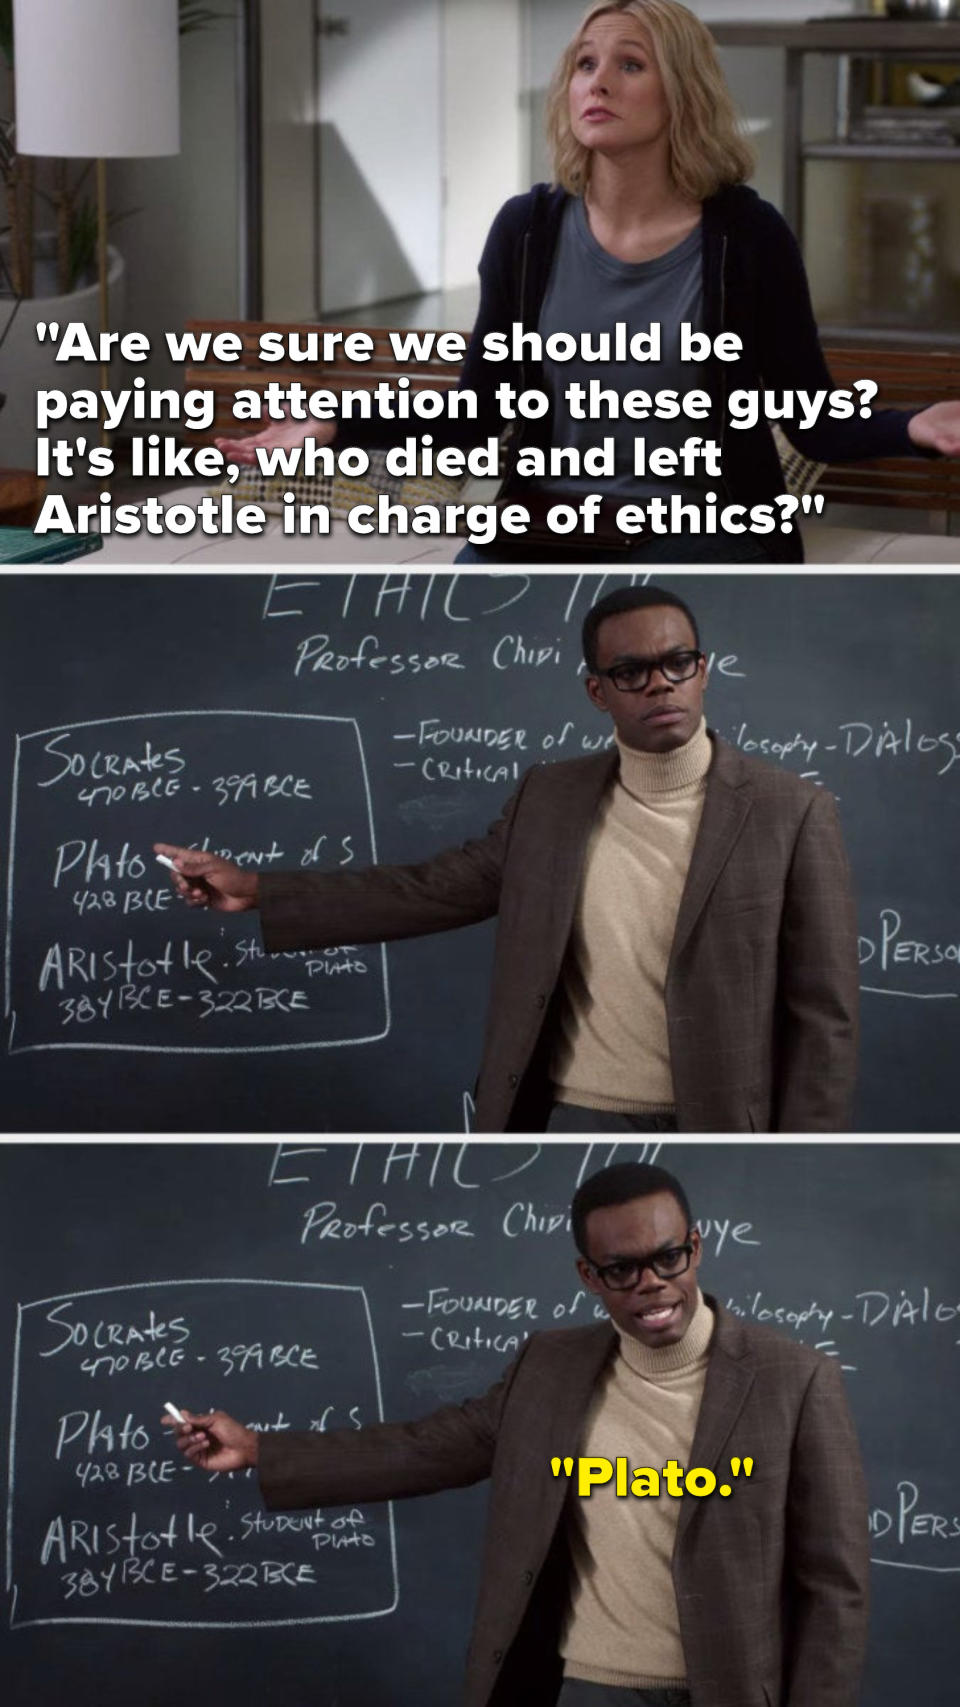 Eleanor says, "Are we sure we should be paying attention to these guys, it's like, who died and left Aristotle in charge of ethics," and Chidi points to his whiteboard and says, "Plato"